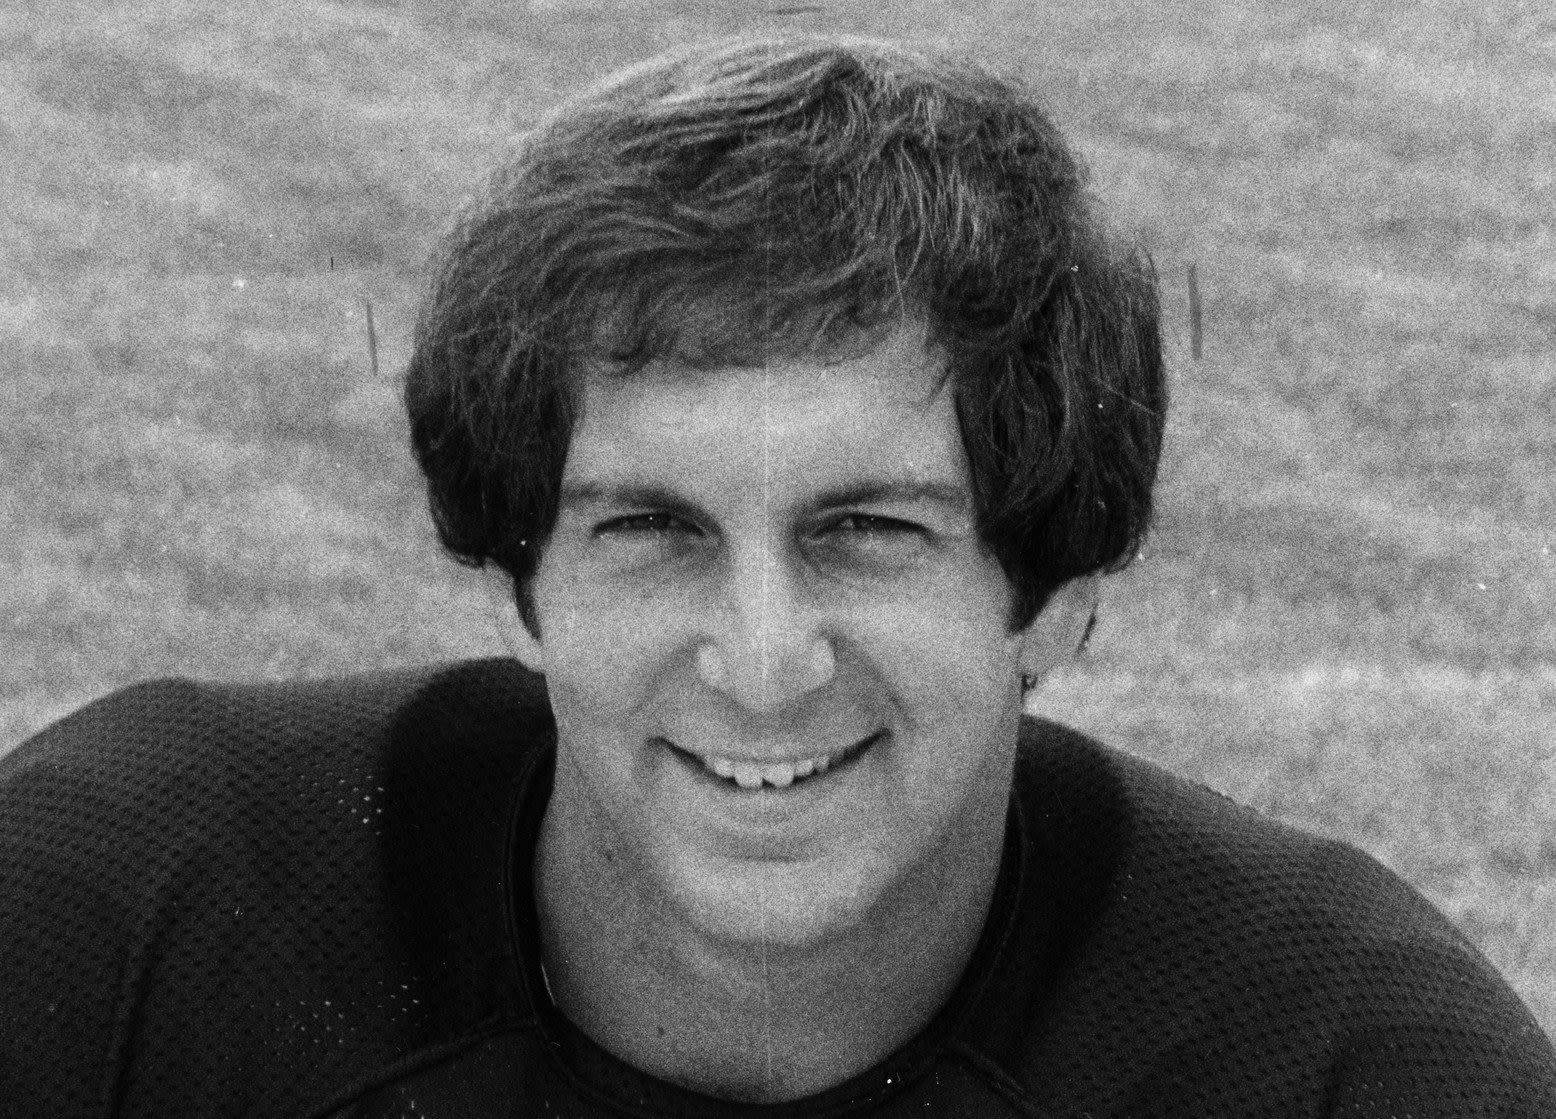 Former Chicago Bears QB Bob Avellini, who helped the team make the playoffs in 1977, dies at 70